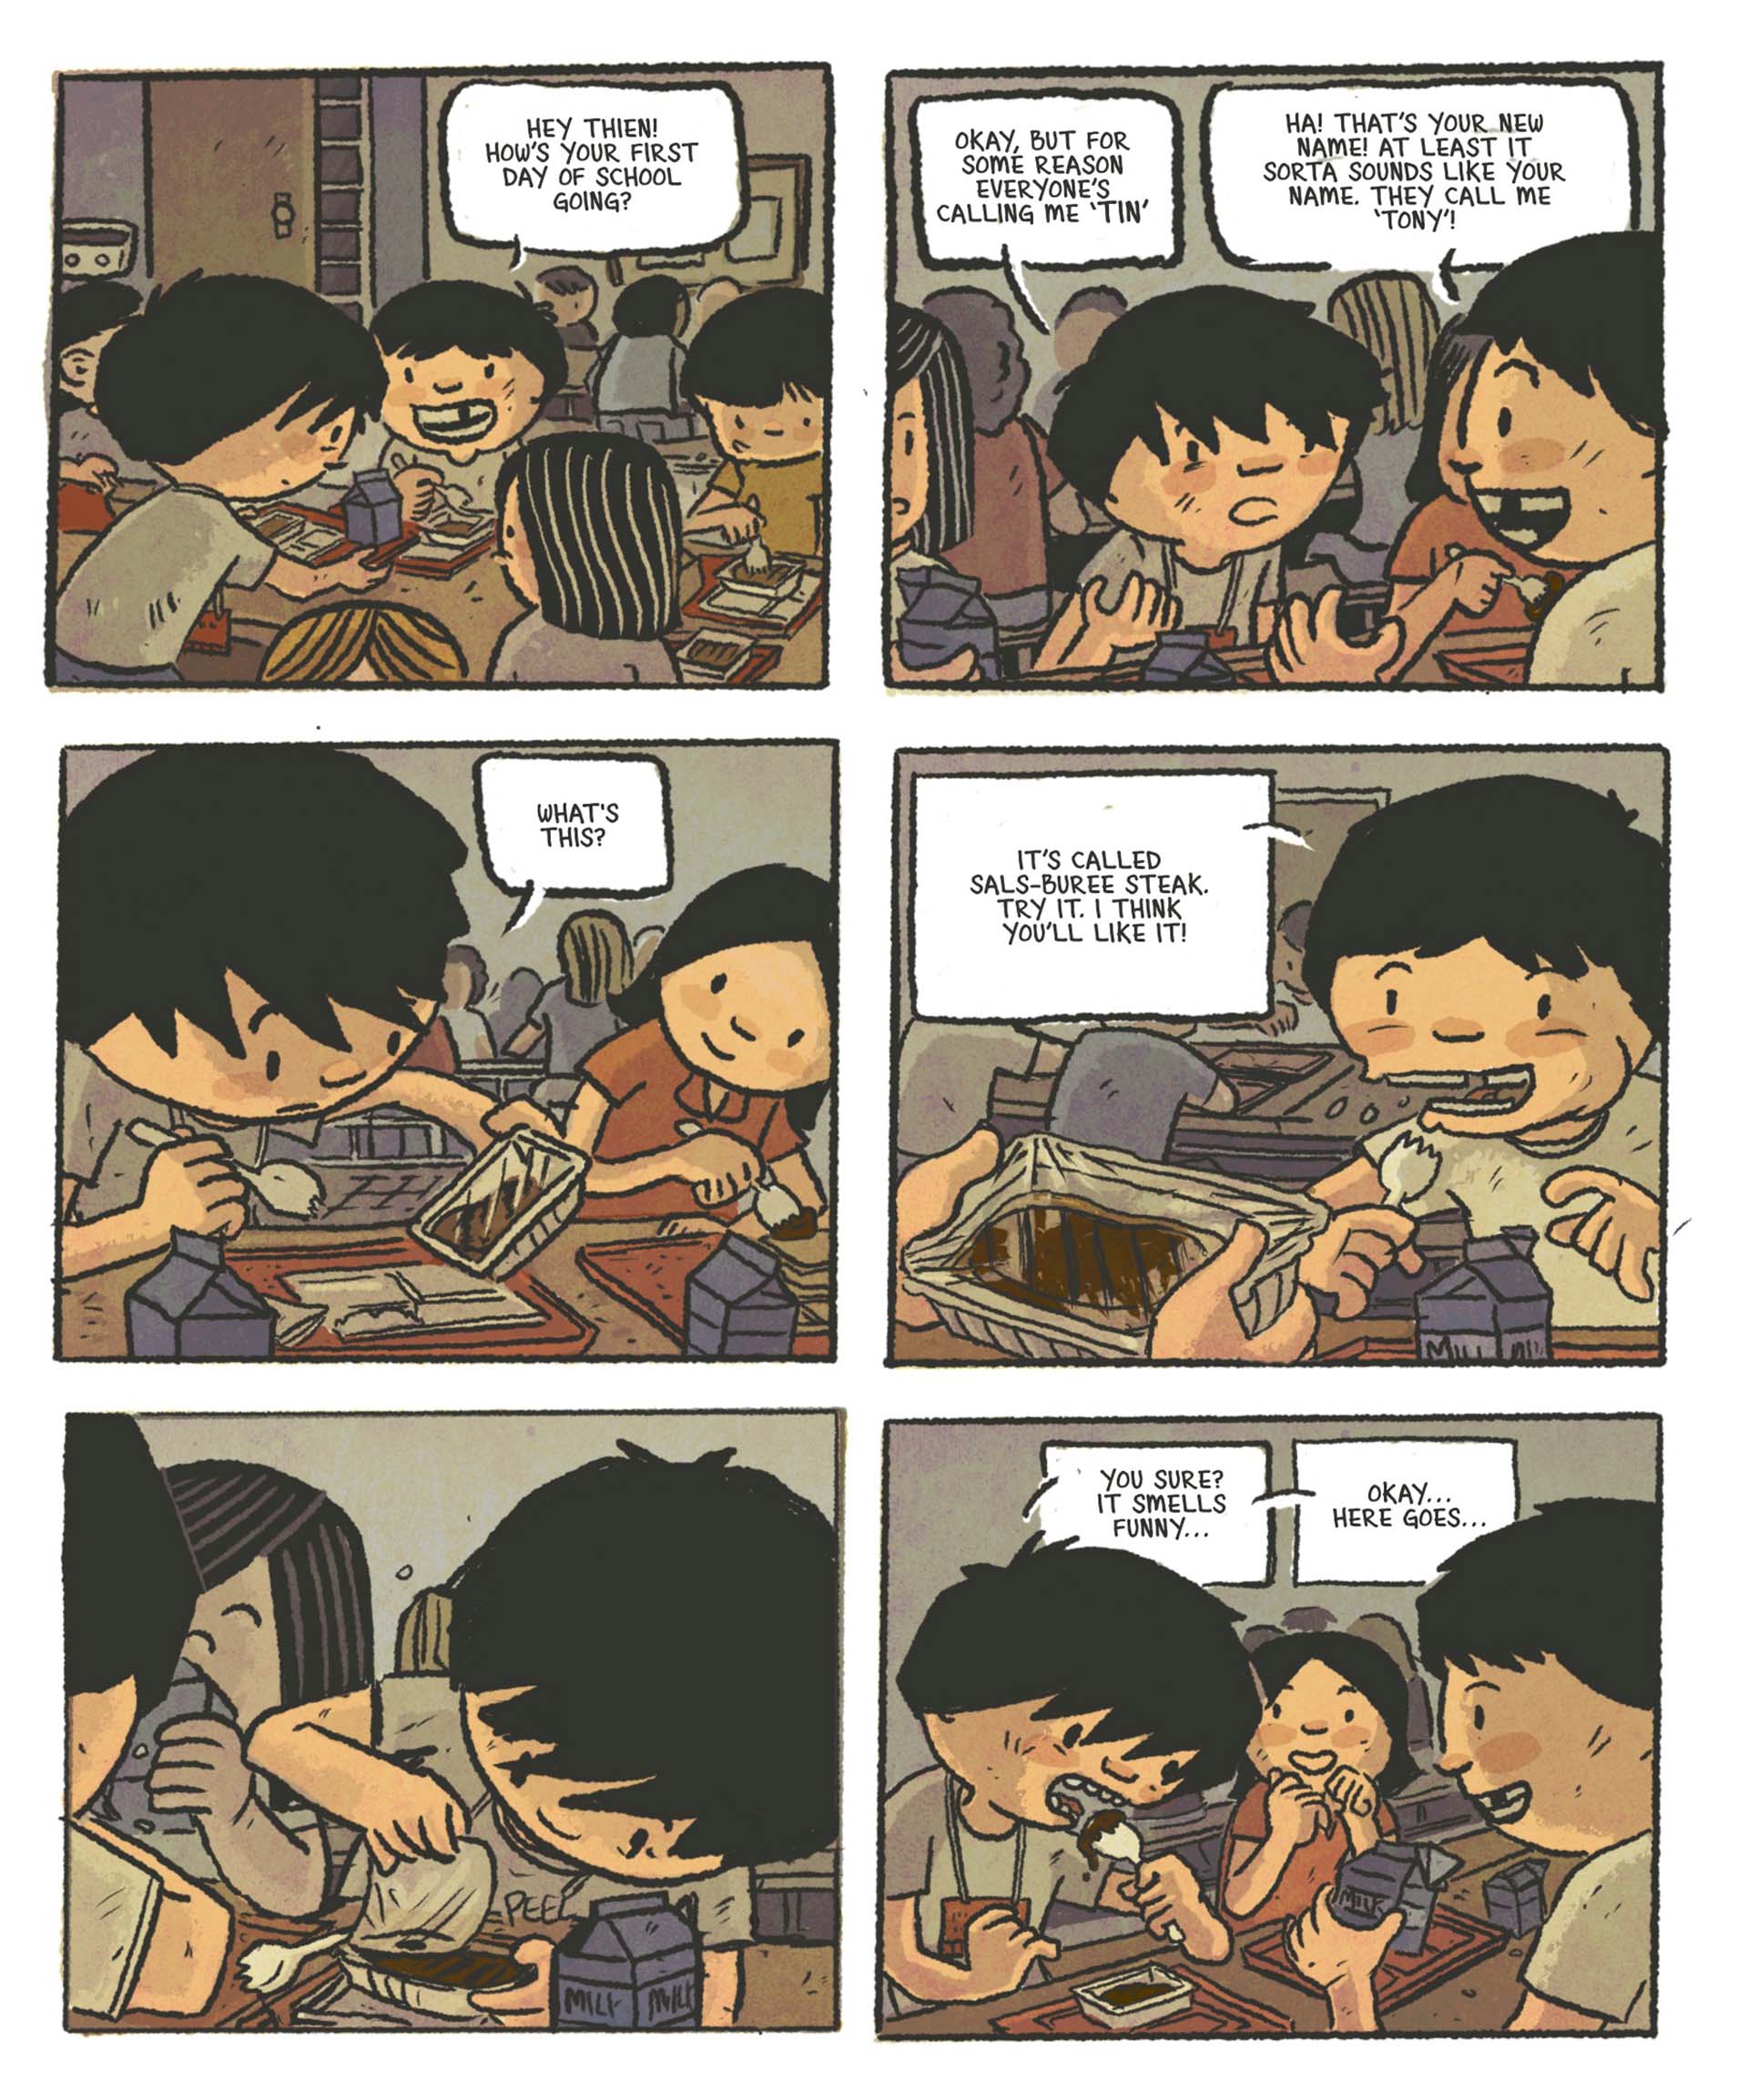 Excerpted panels from a graphic novel: 1) Kids eating lunch at a table in the cafeteria. A smiling, gap-toothed boy says, "Hey Thien! How's your first day of school going?" 2) Thien, with a perplexed expression, responds, "Okay, but for some reason everyone's calling me 'Tin.' The gap-toothed boy responds, "Ha! That's your new name! At least it sorta sounds like your name. They call me 'Tony'!" 3) Thien examines a plastic-wrapped carton of food. "What's this?" 4) While chewing, gap-toothed boy responds, "It's called sals-buree steak. Try it. I think you'll like it!" 5) Thien warily peels back the plastic wrap. 6) As prepares to put a spork-ful in his mouth, he says, "You sure? It smells funny..." "Okay, here goes..."